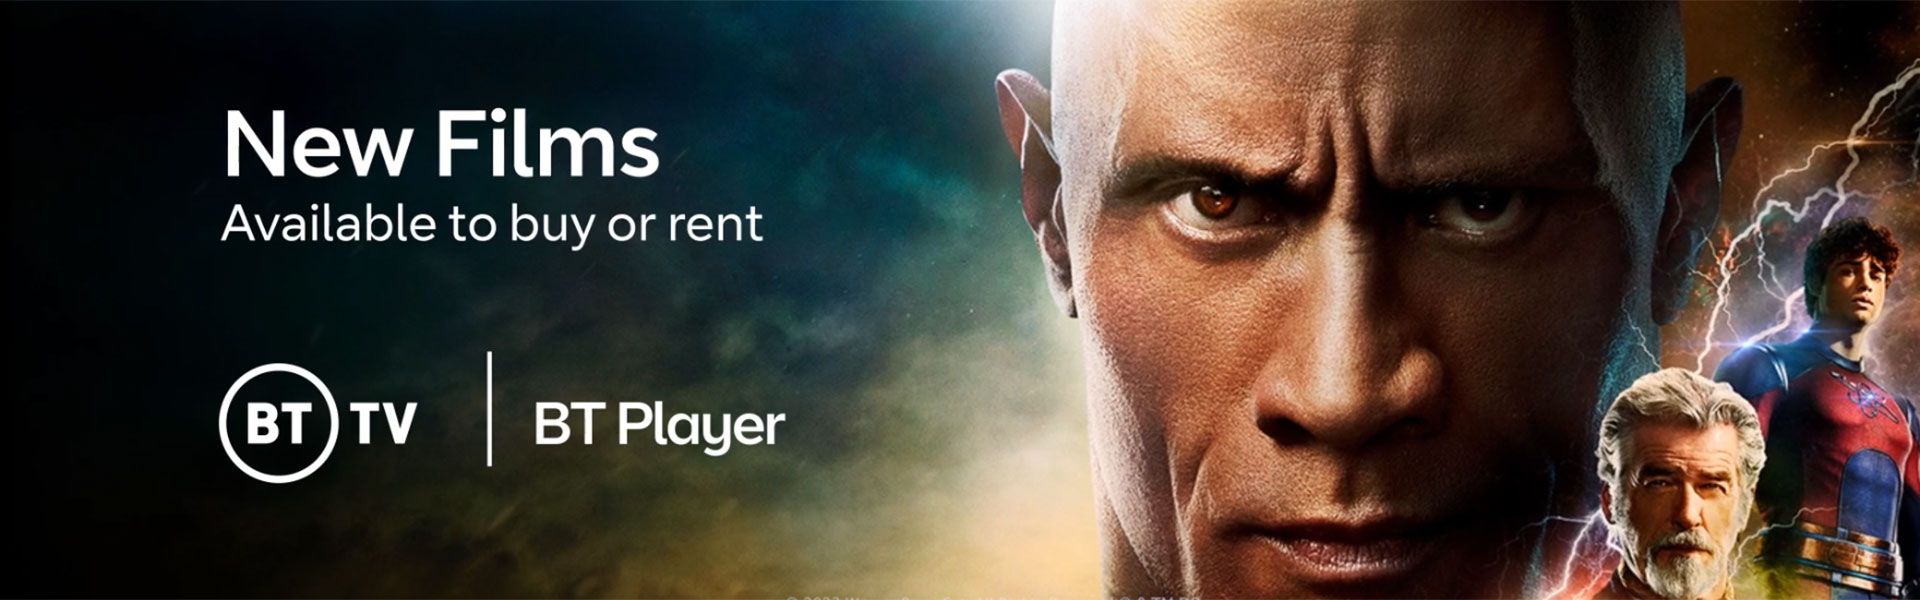 New Films to Buy or Rent on BT TV